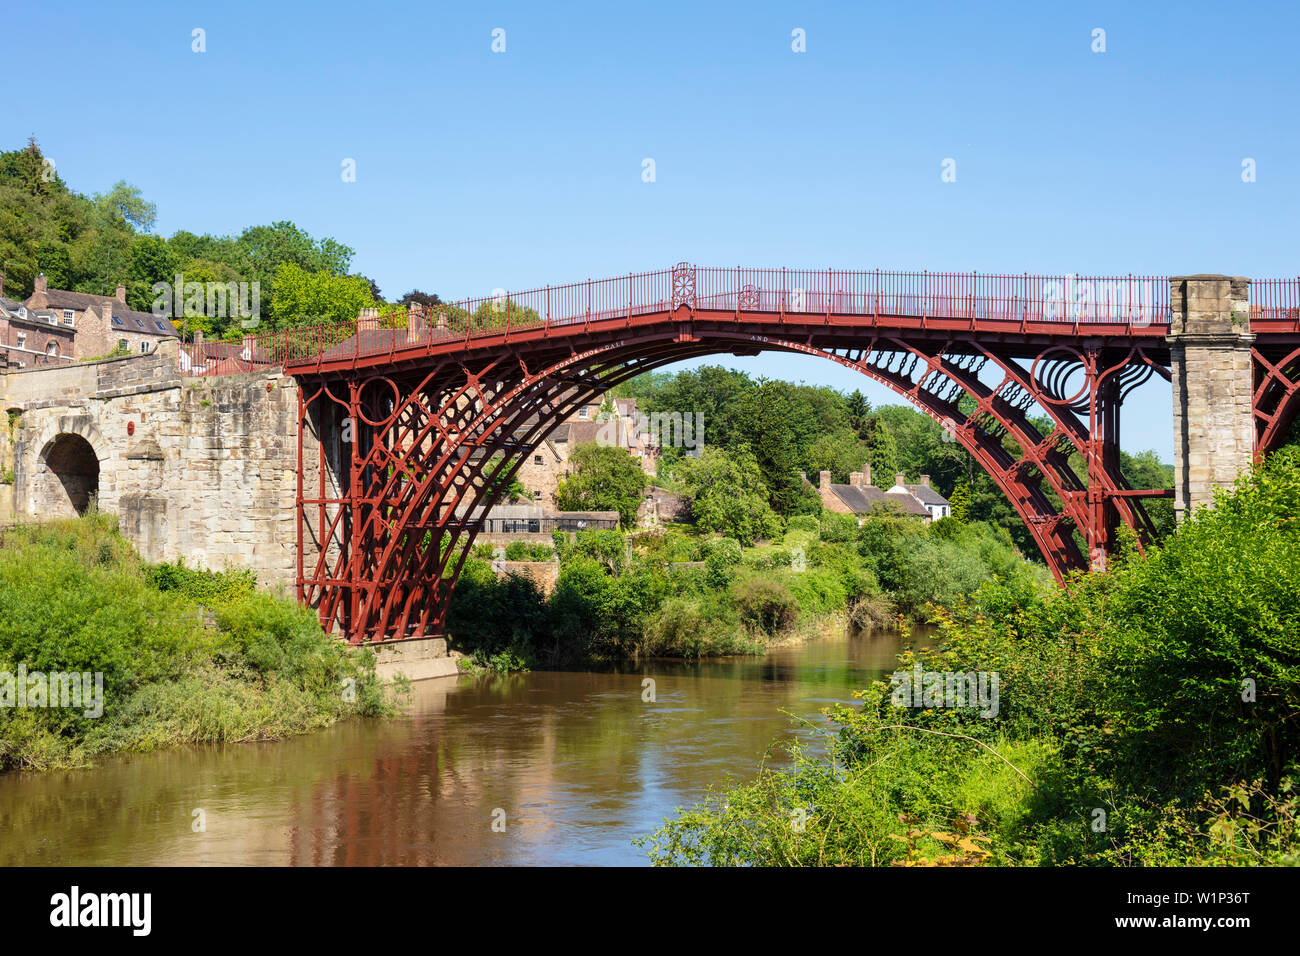 Freshly Painted In Original Colours The Ironbridge Bridge Ironbridge Gorge Iron Bridge Shropshire England Gb Uk Europe Stock Photo Alamy